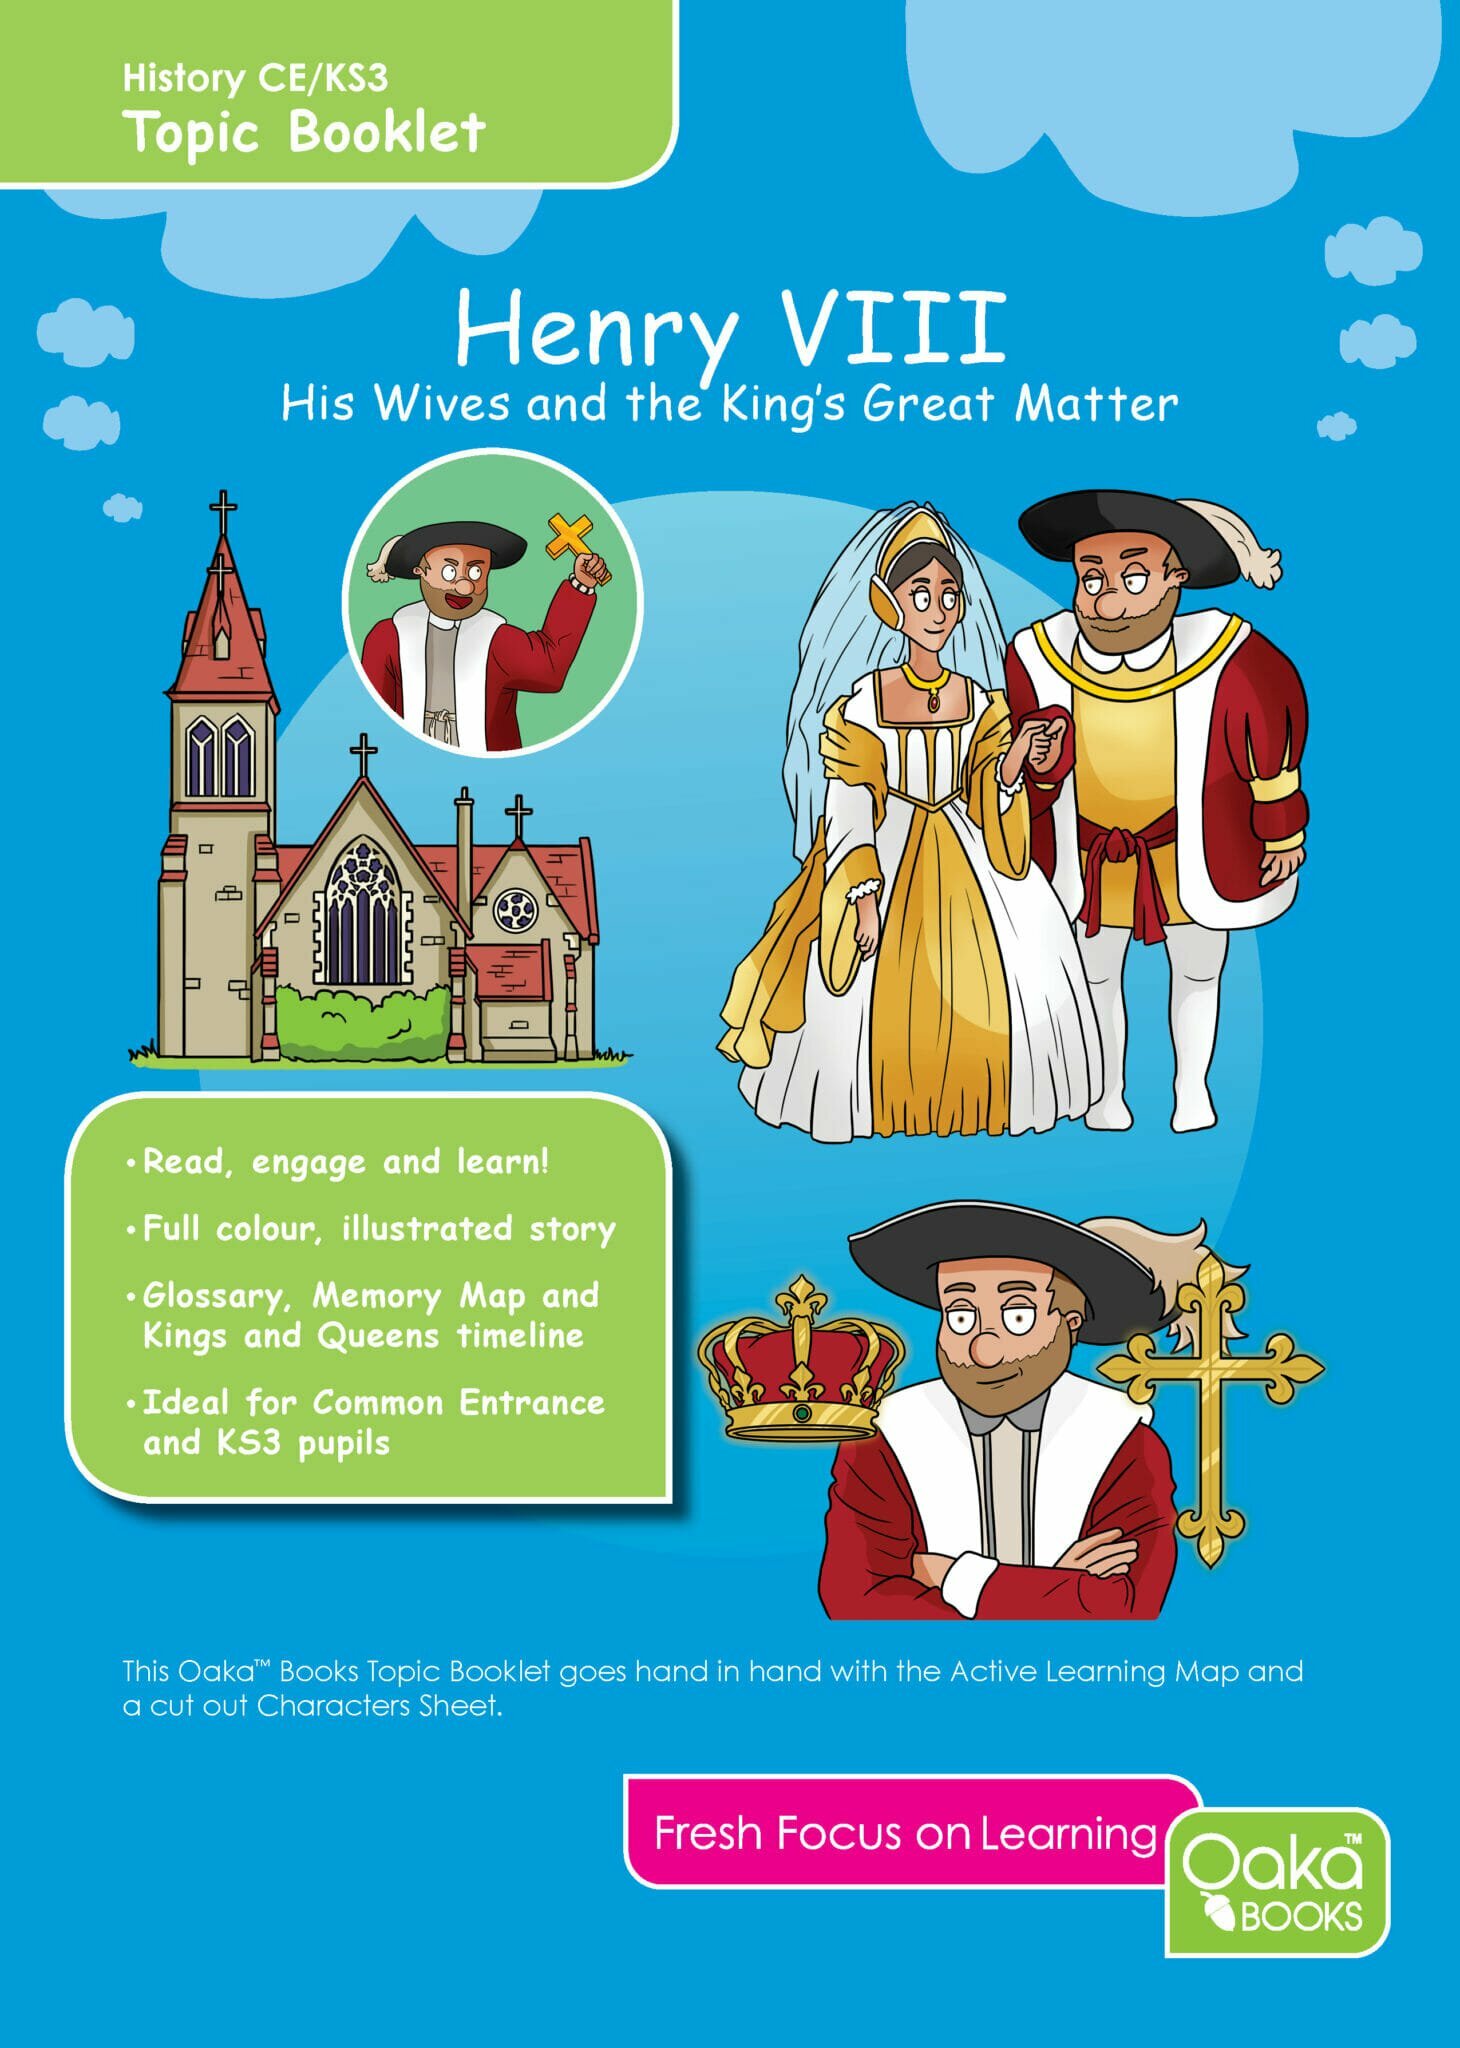 CE/KS3 History: Henry VIII, His Wives & The King’s Great Matter